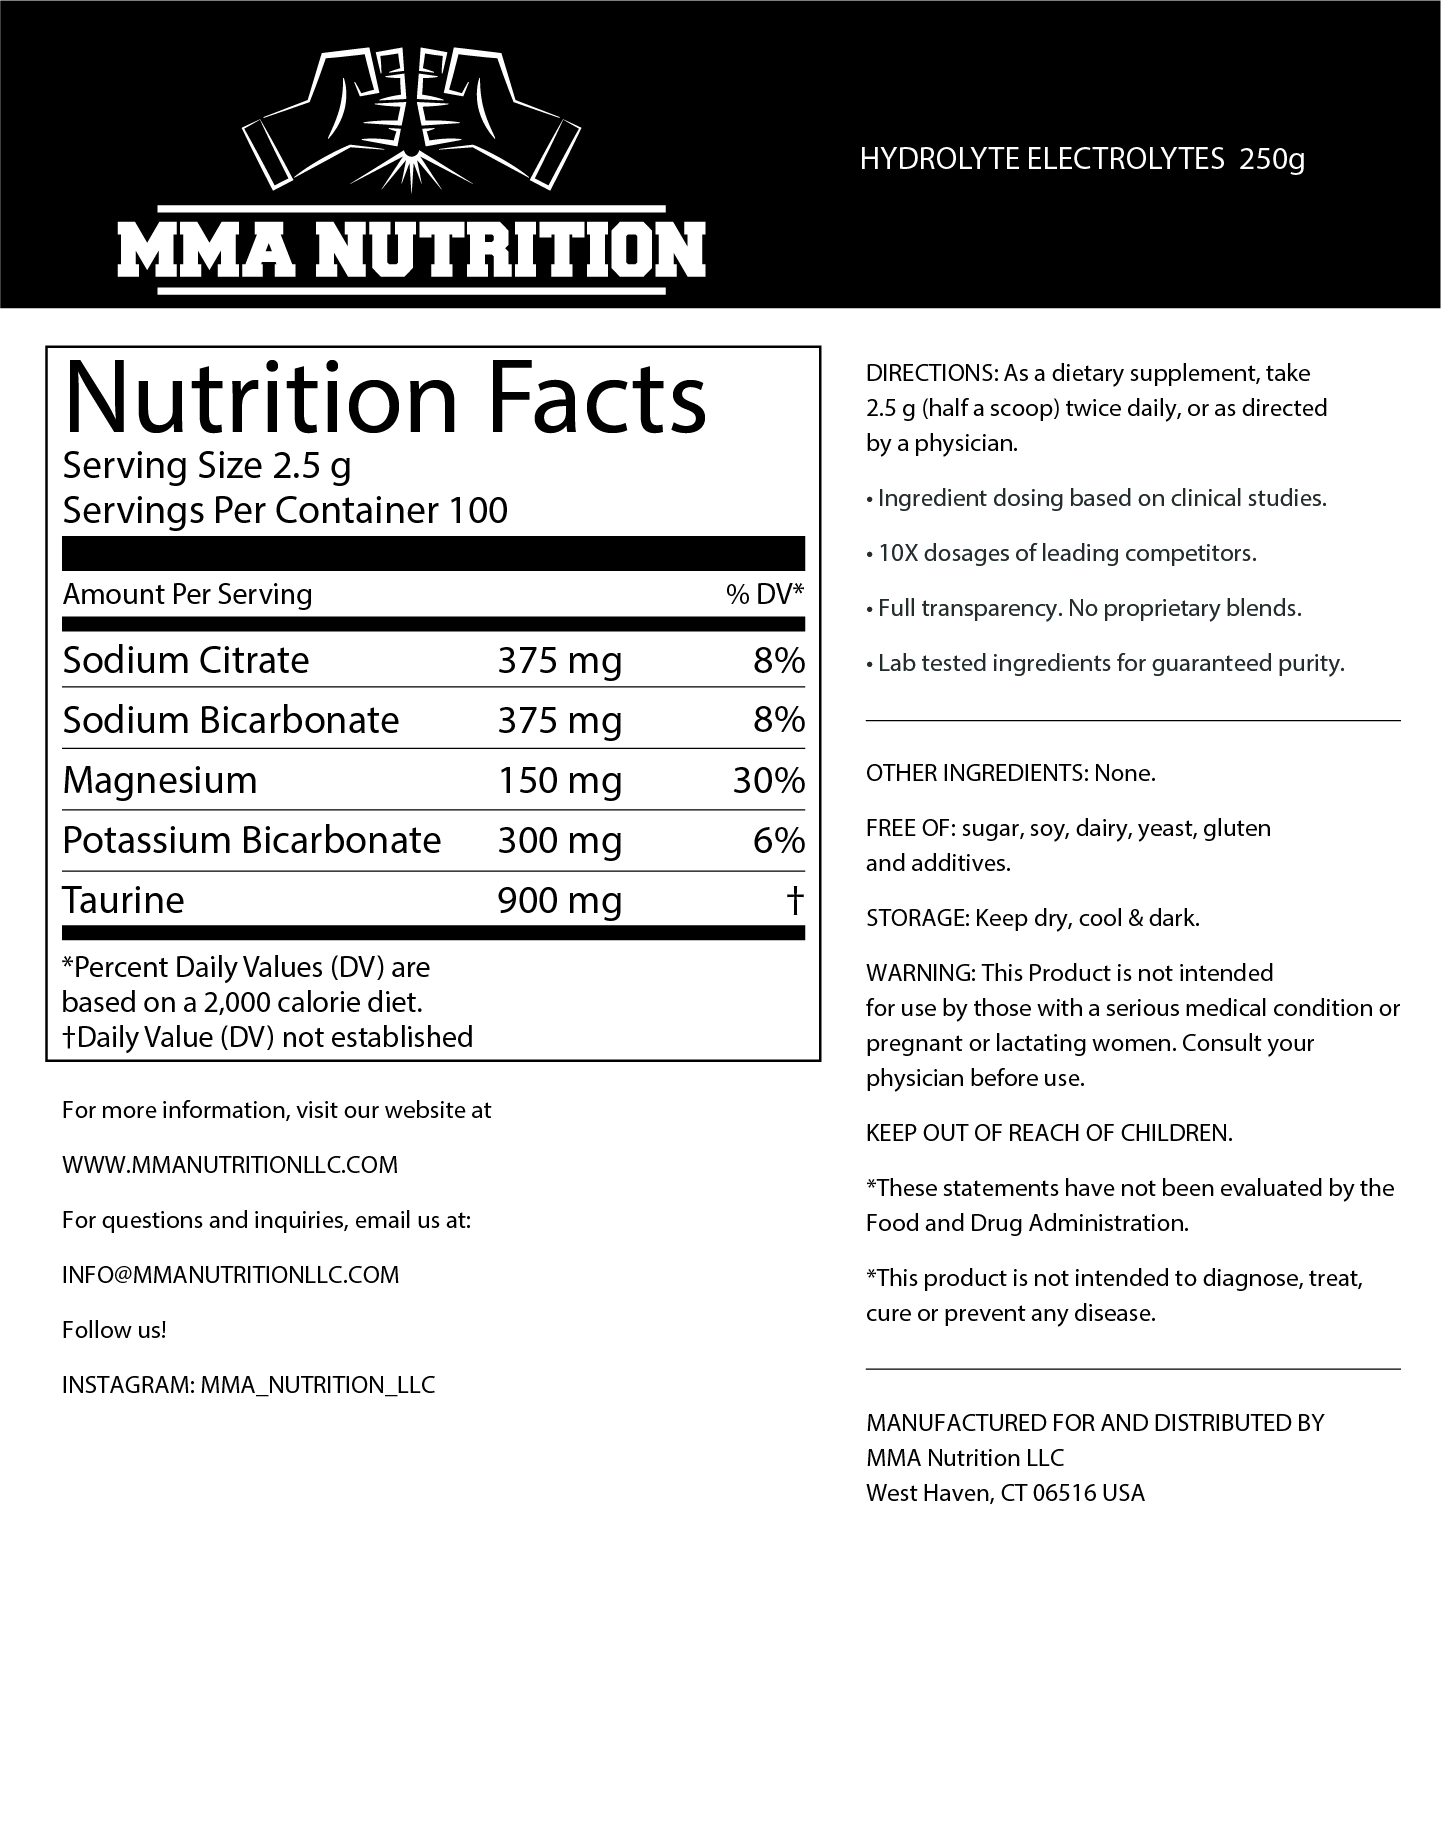 mma-nutrition-hydrolyte-unflavored-250mg-back-label-nutrition-facts.jpg